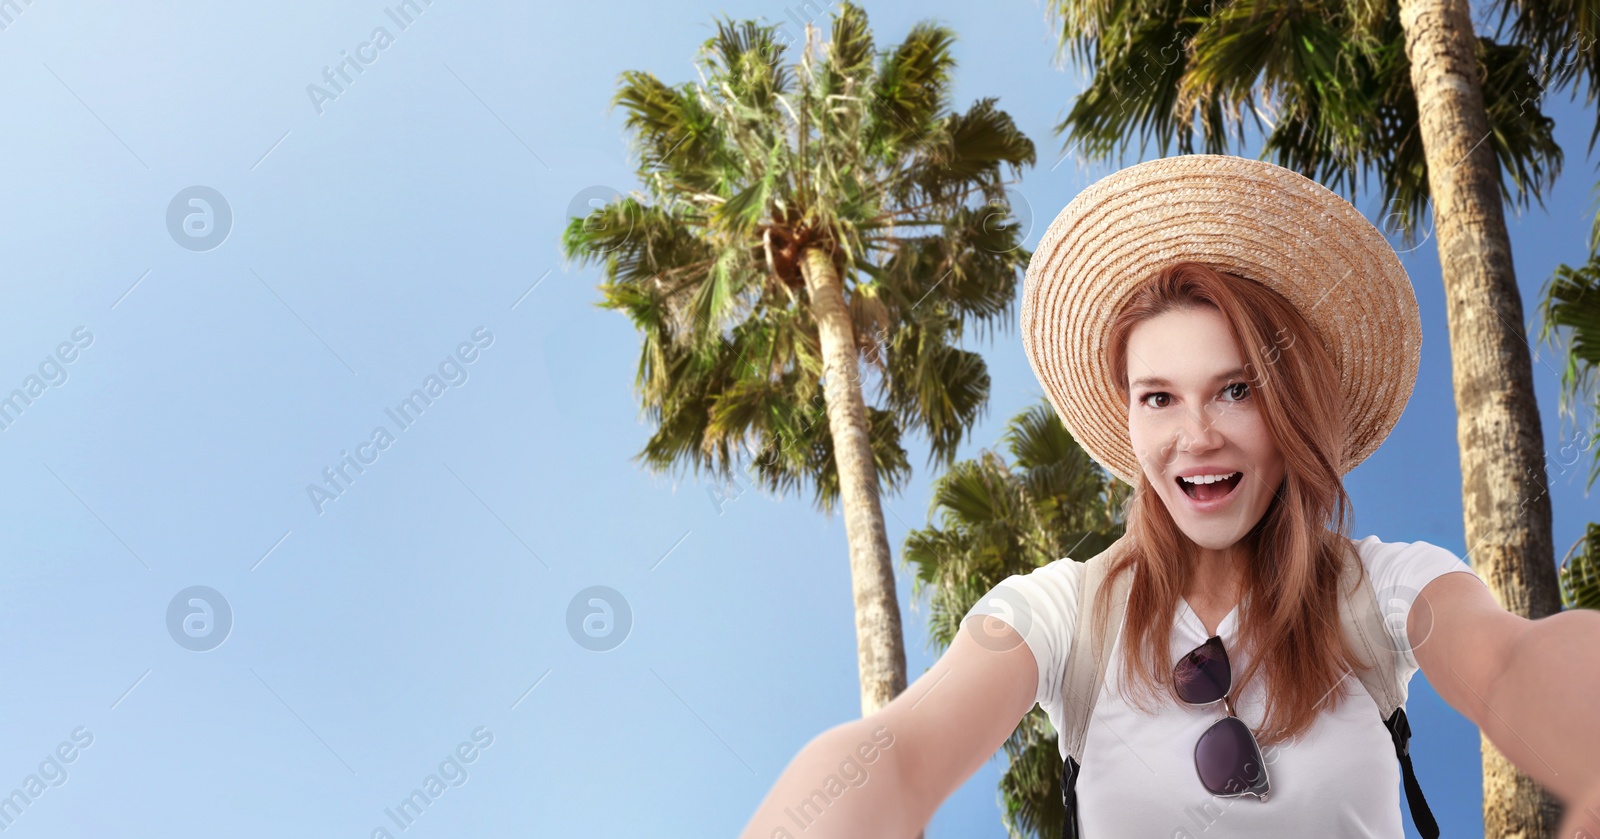 Image of Beautiful woman in straw hat taking selfie near tropical palms. Banner design with space for text